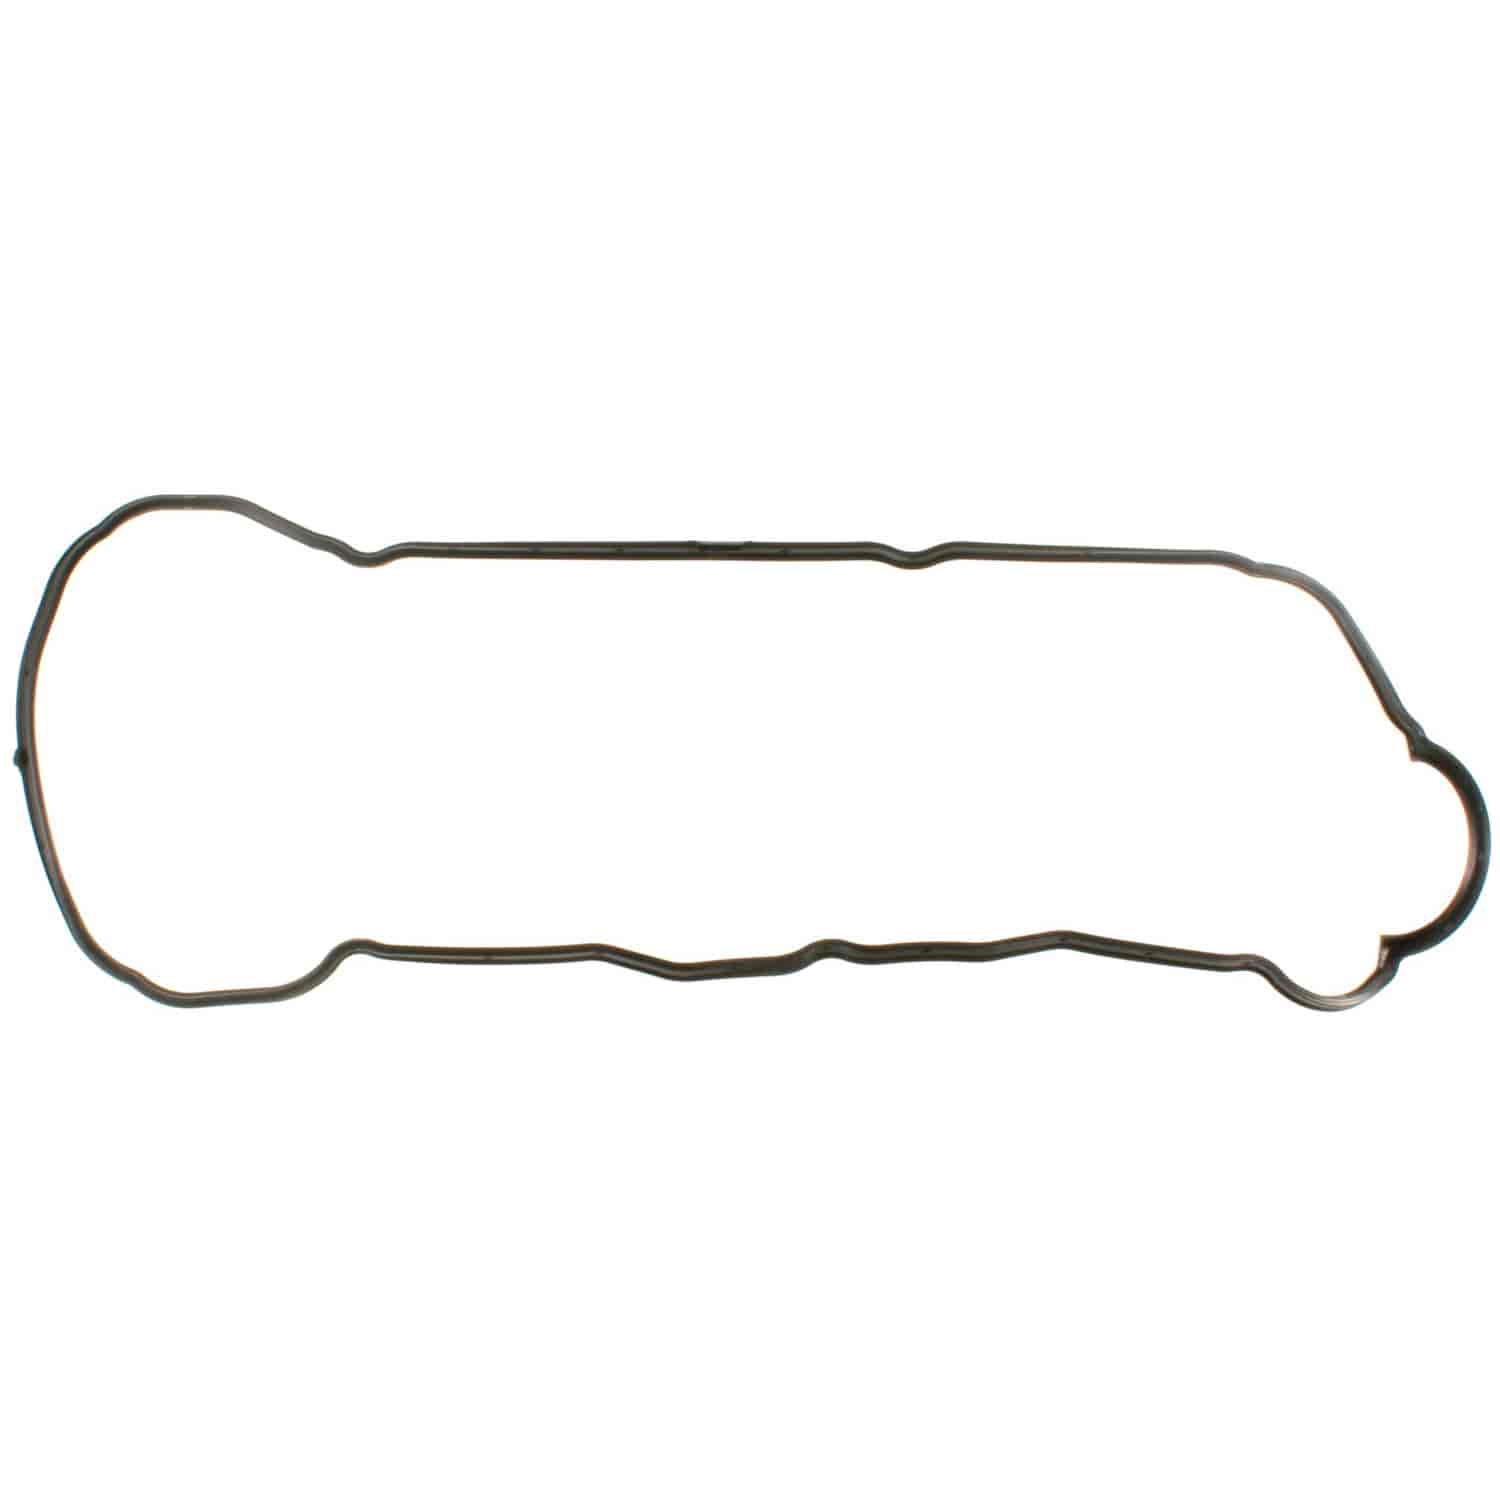 Valve Cover Gasket Right Lex 2995 1994-2003 LexTrk 2995 1999-2003 Toy 2995 1994-2002 RIGHT